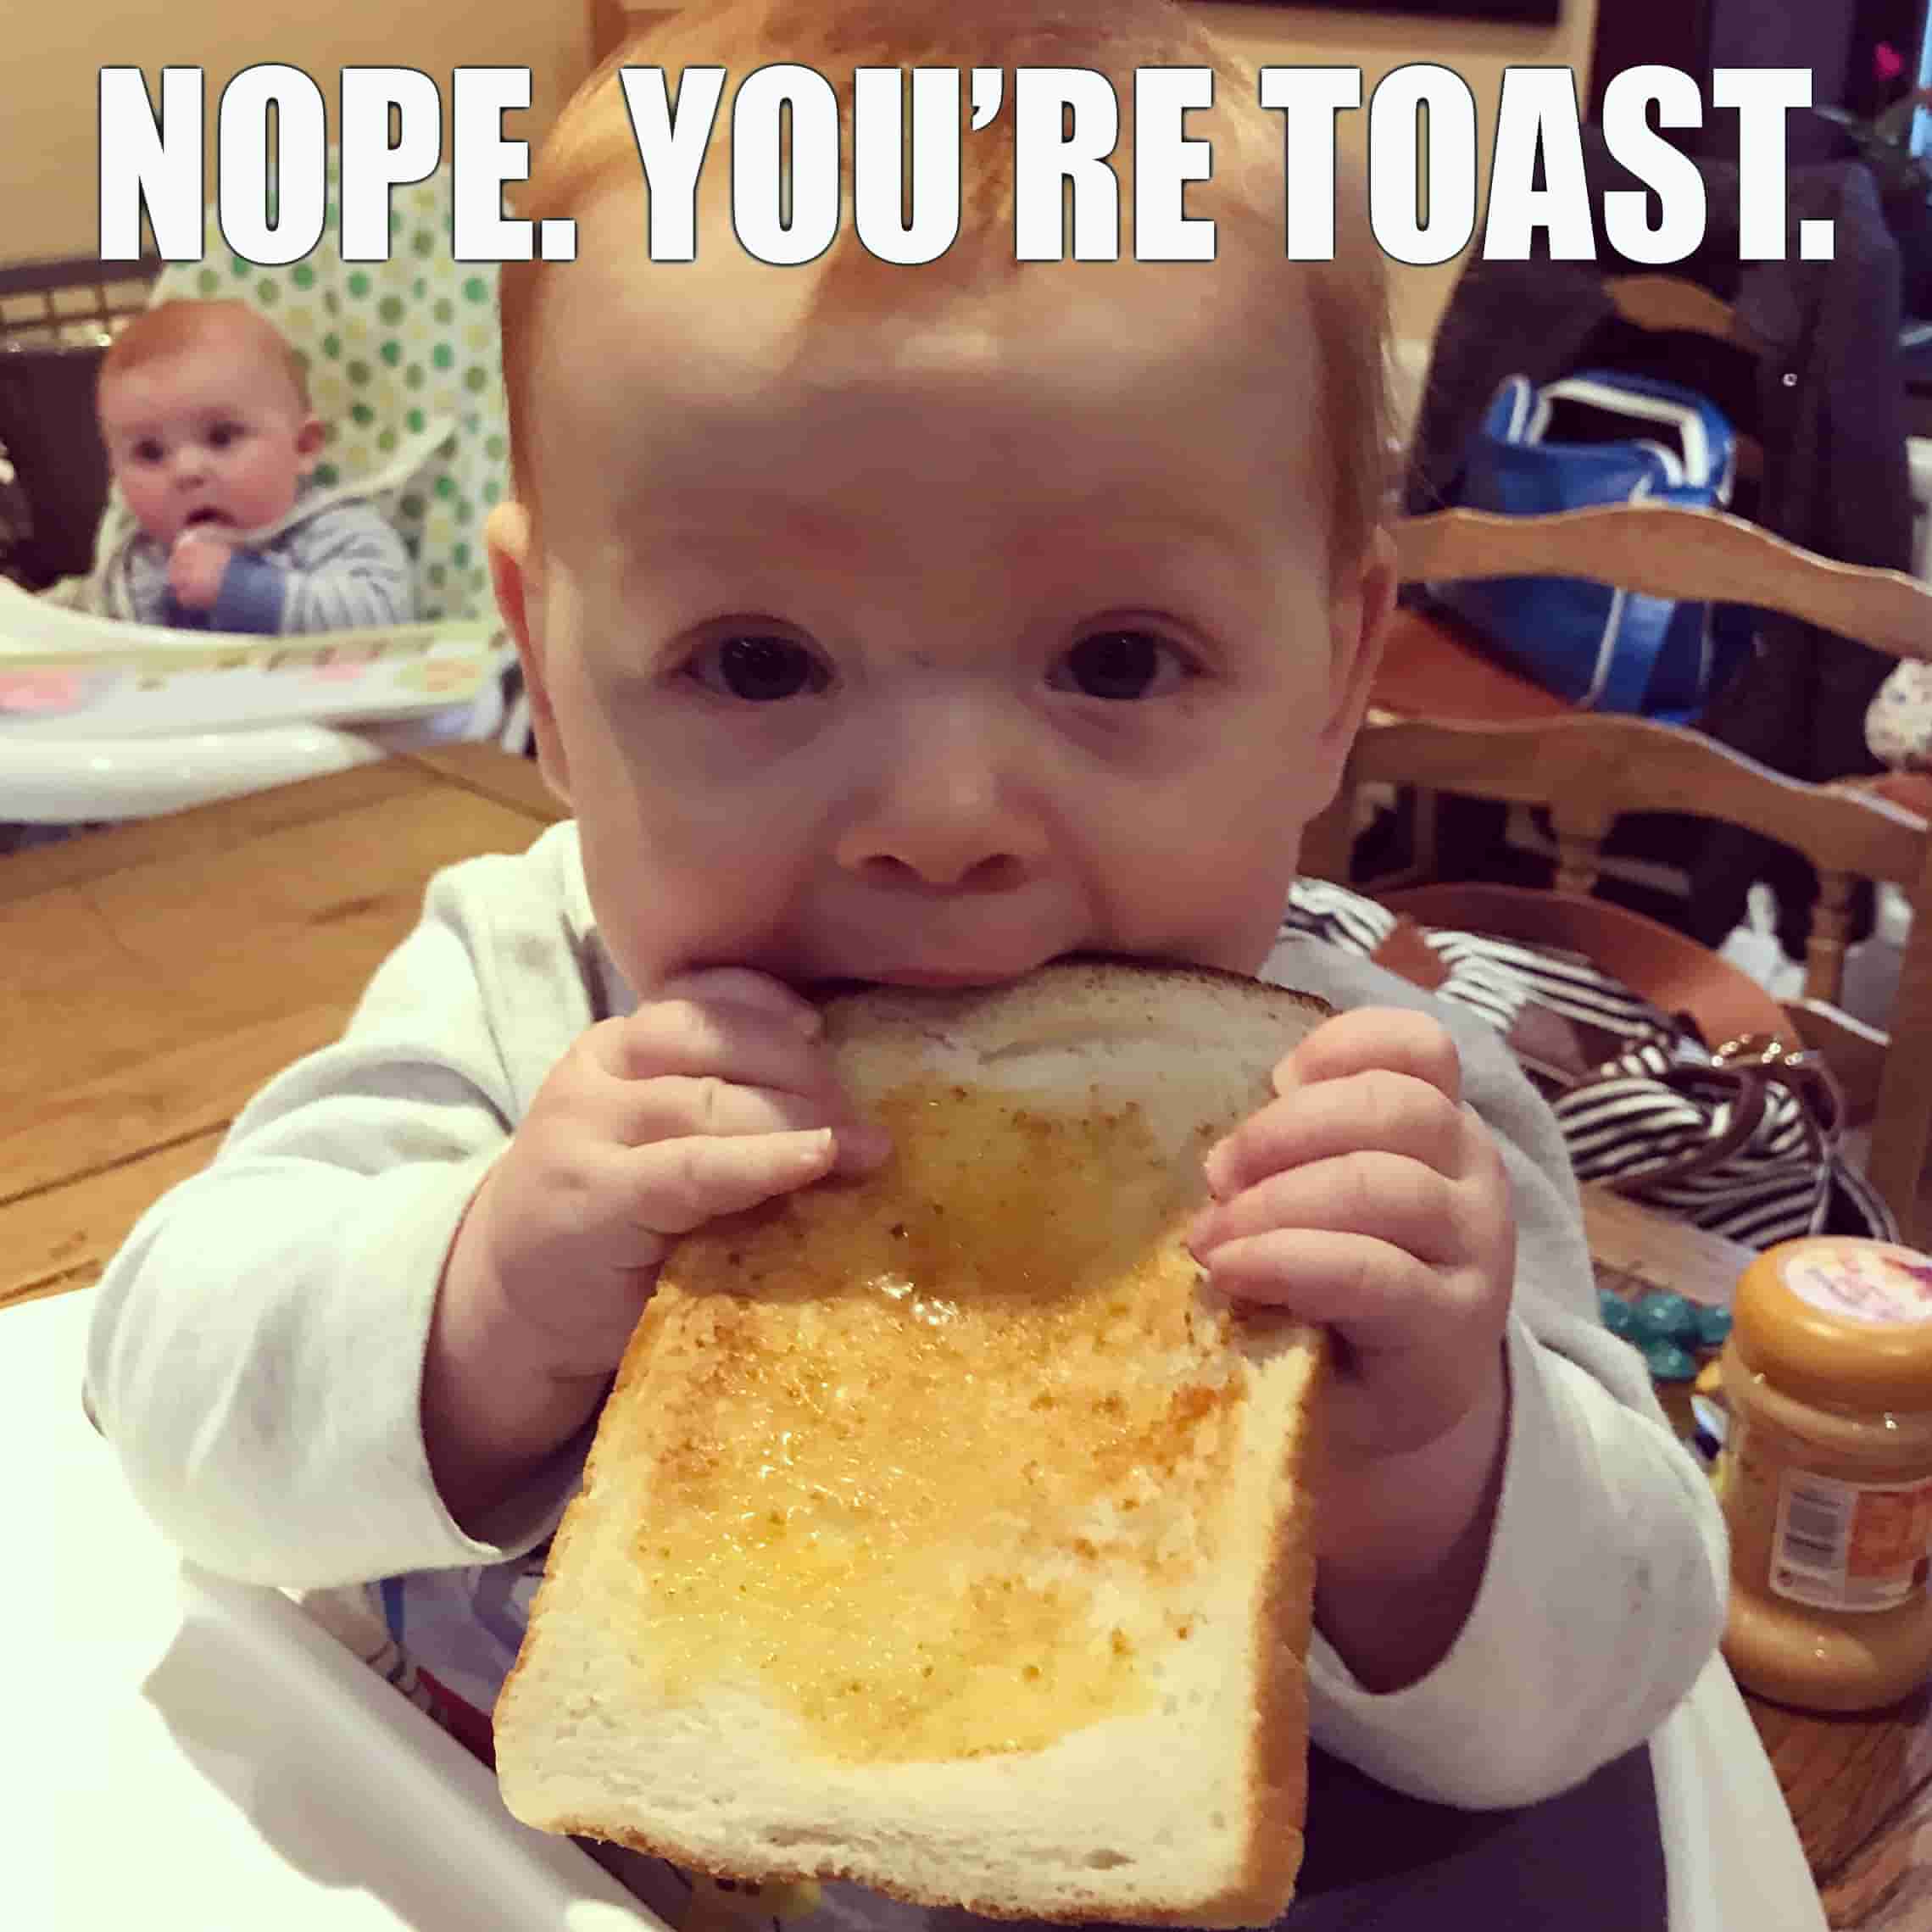 Photo of baby with toast. Caption: nope. you're toast.